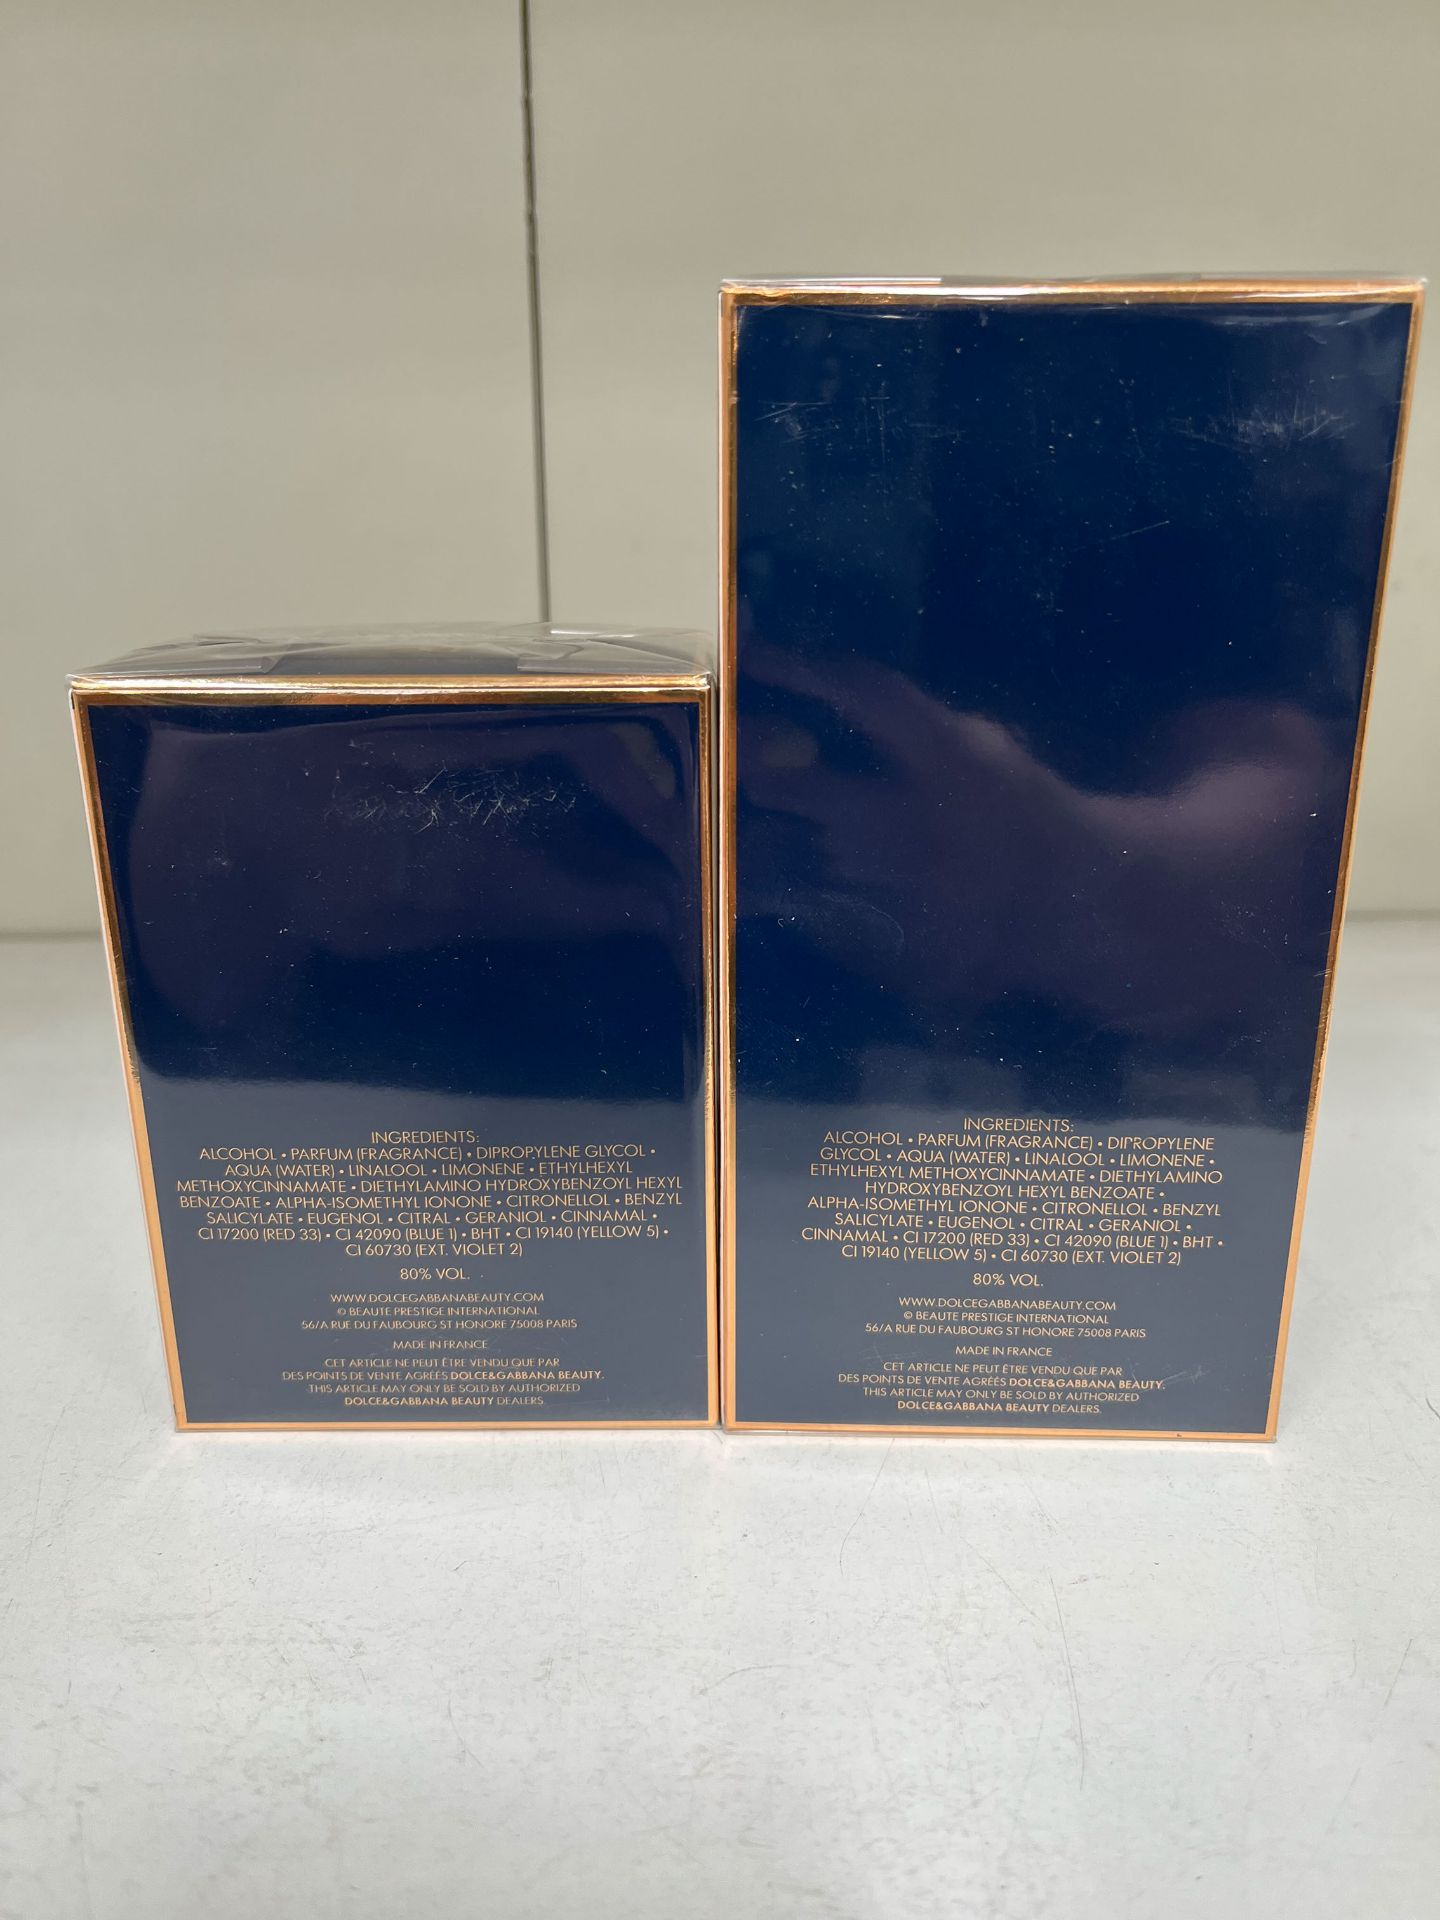 2x Dolce & Gabbana Aftershave - Image 2 of 3